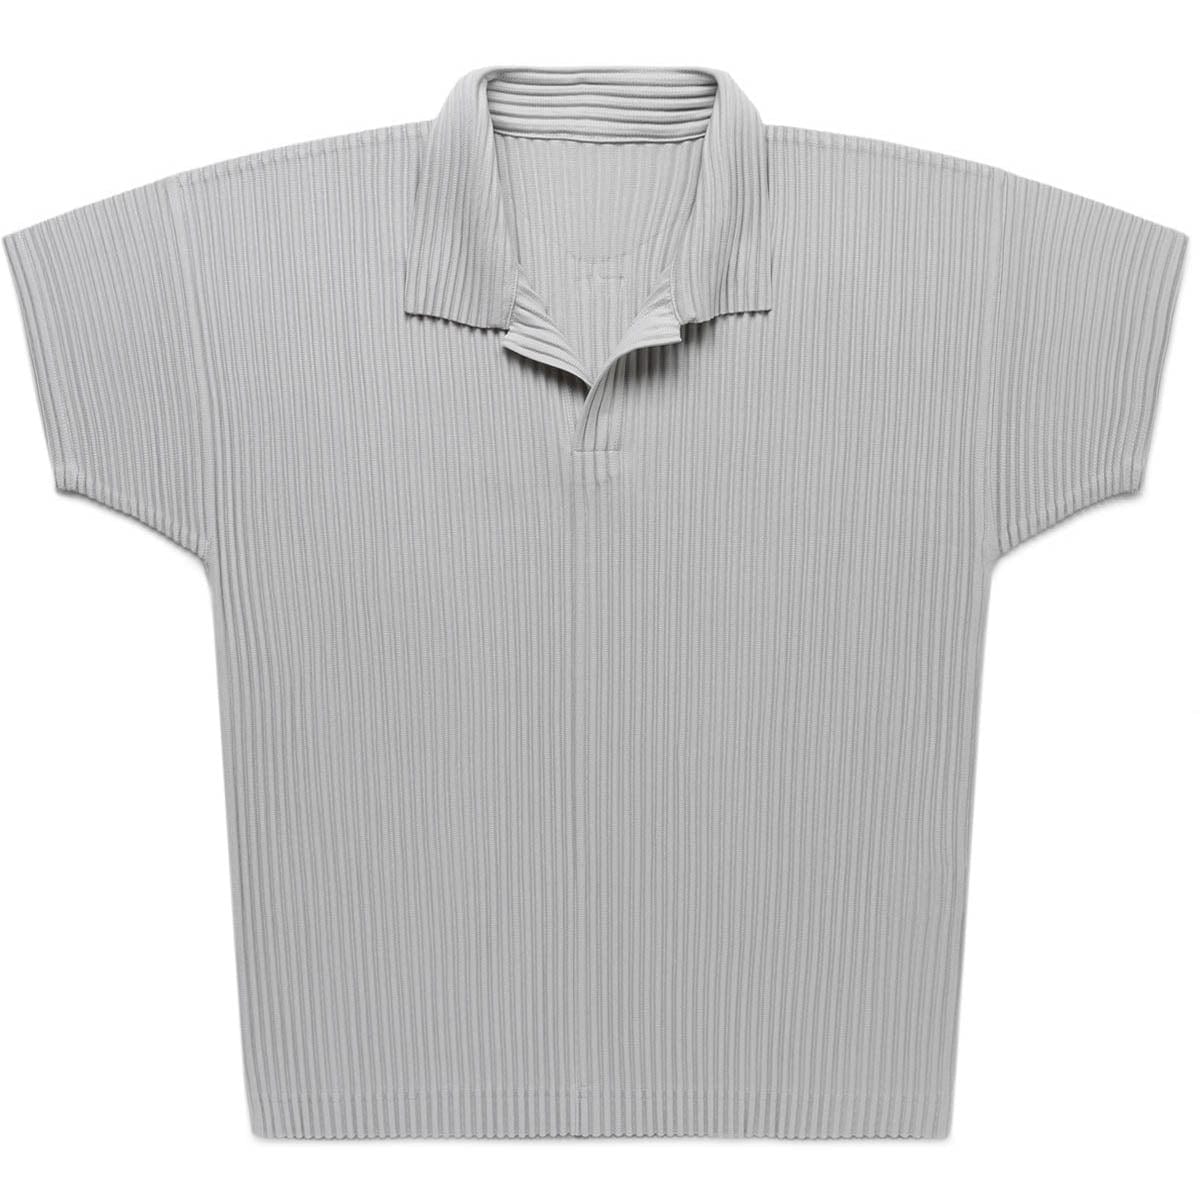 BASICS TOP, The official ISSEY MIYAKE ONLINE STORE